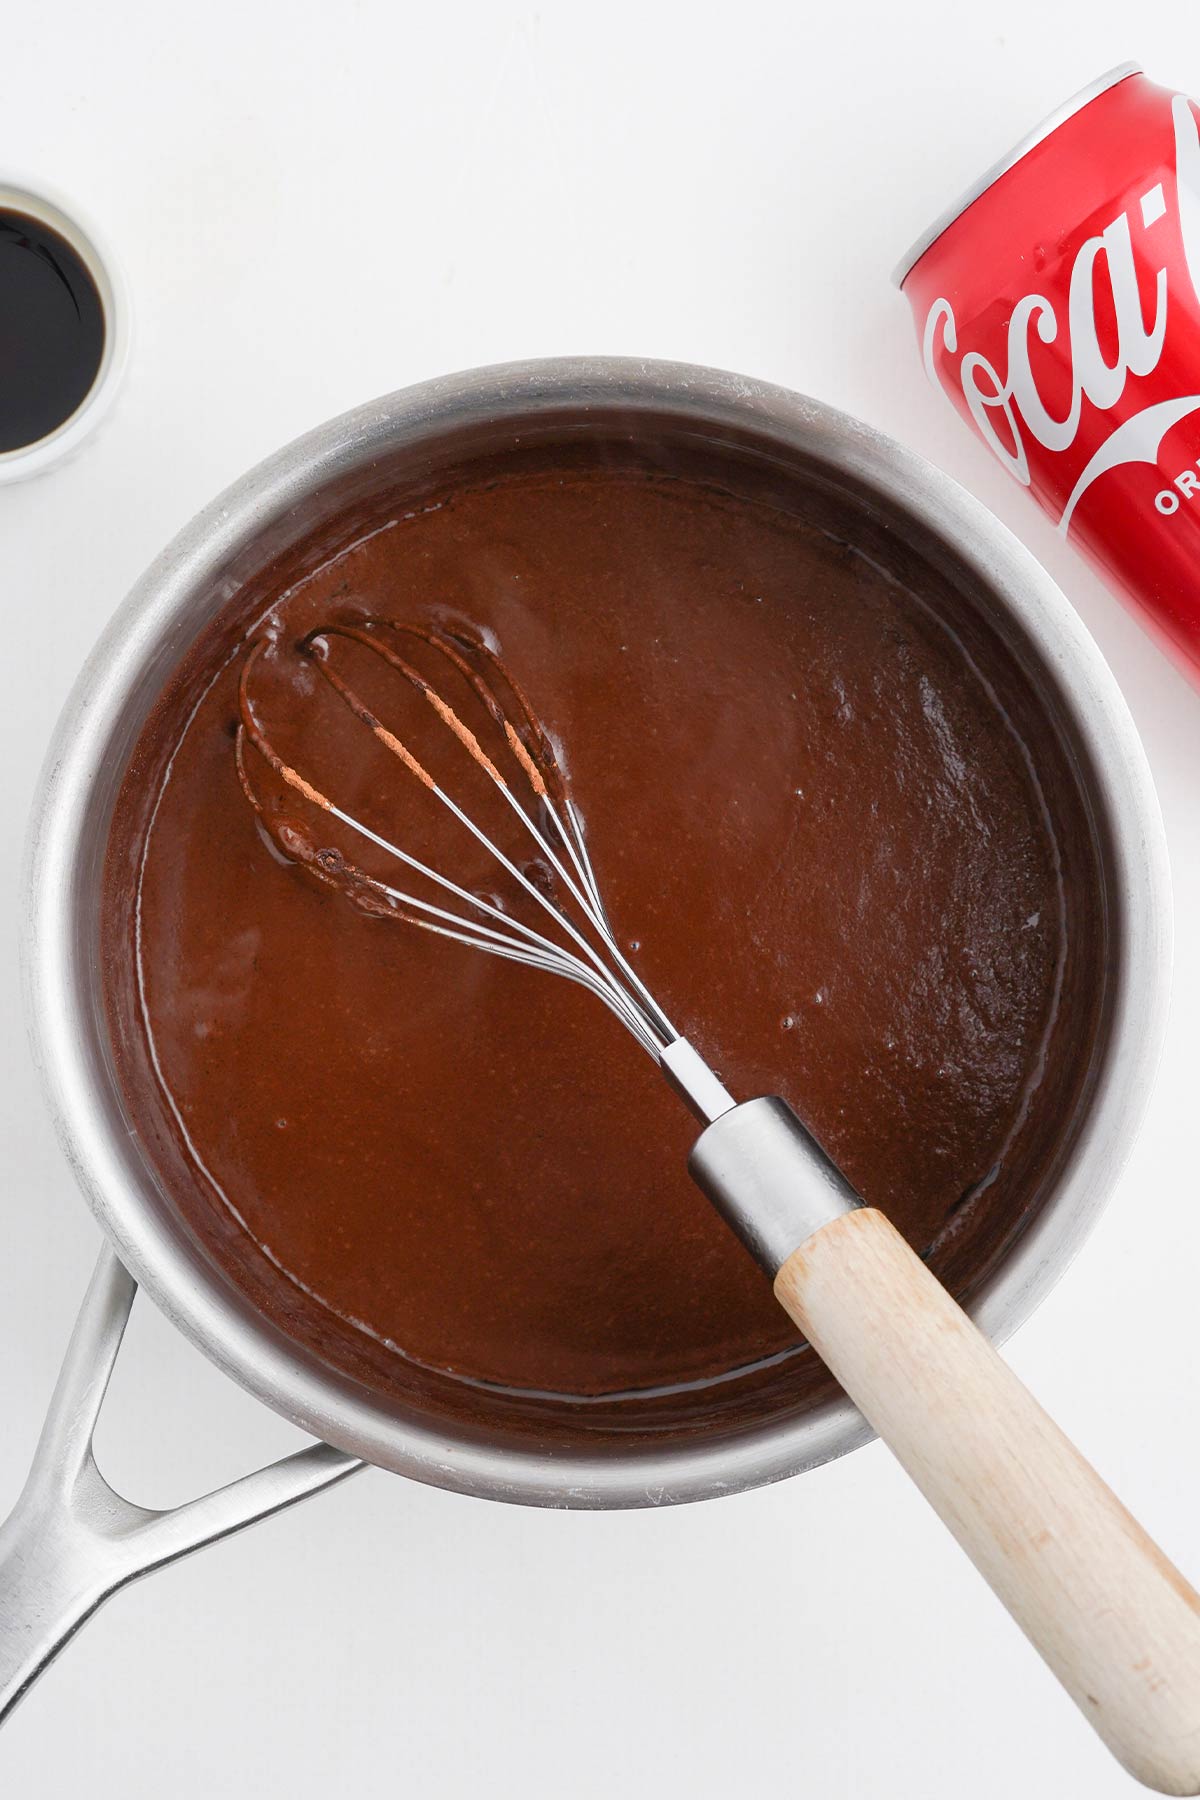 Chocolate icing in a saucepan to make coca cola cake.